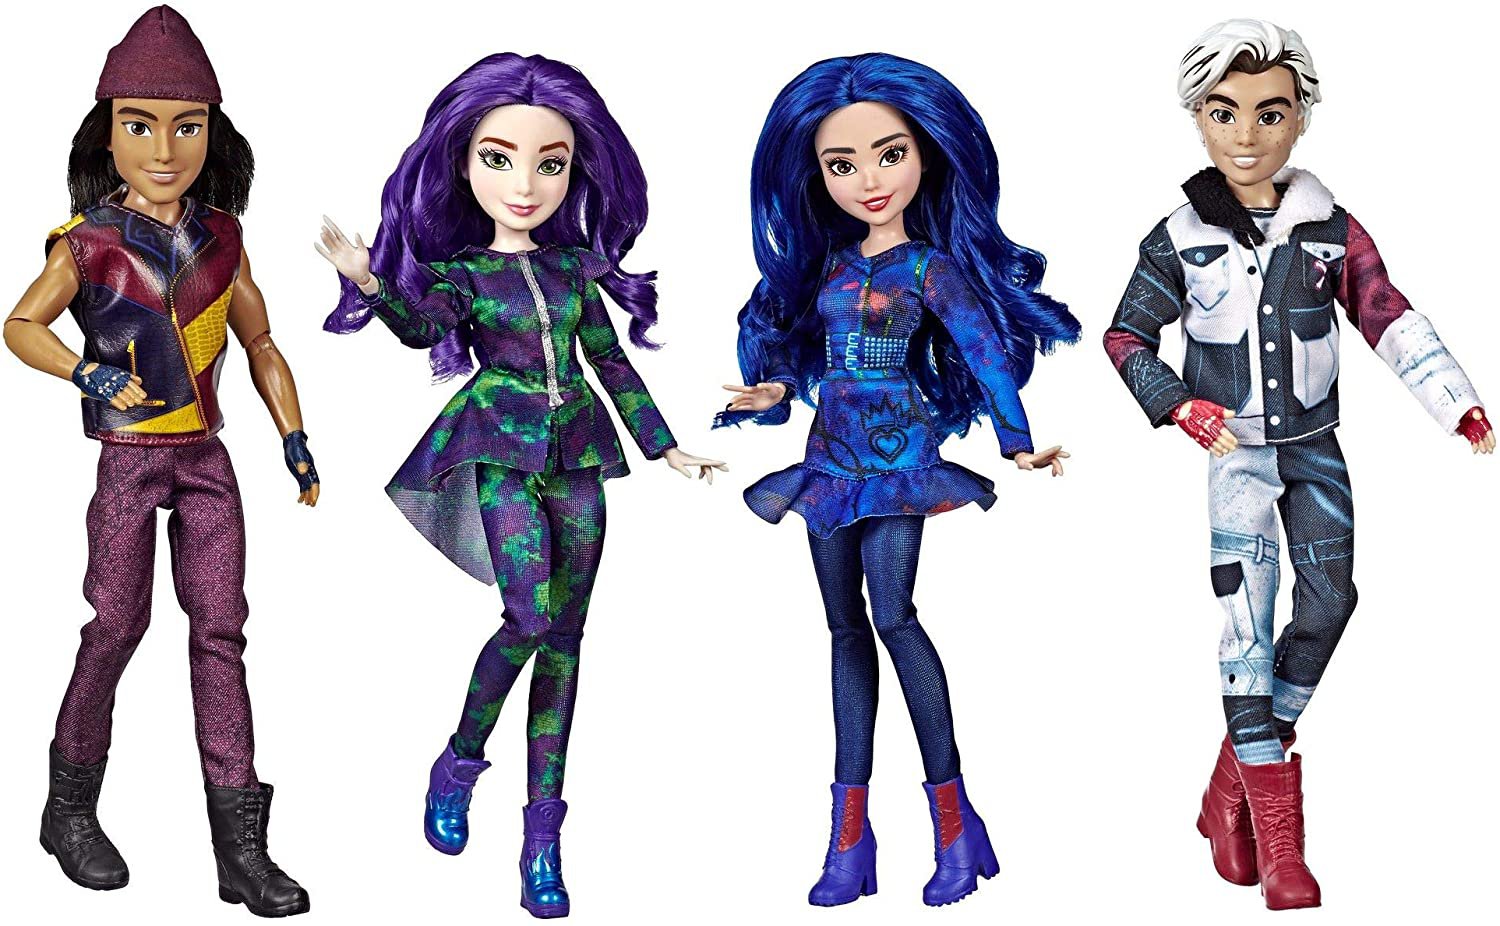 Disney Descendants 3 Isle of The Lost Collection Dolls Pack of 4